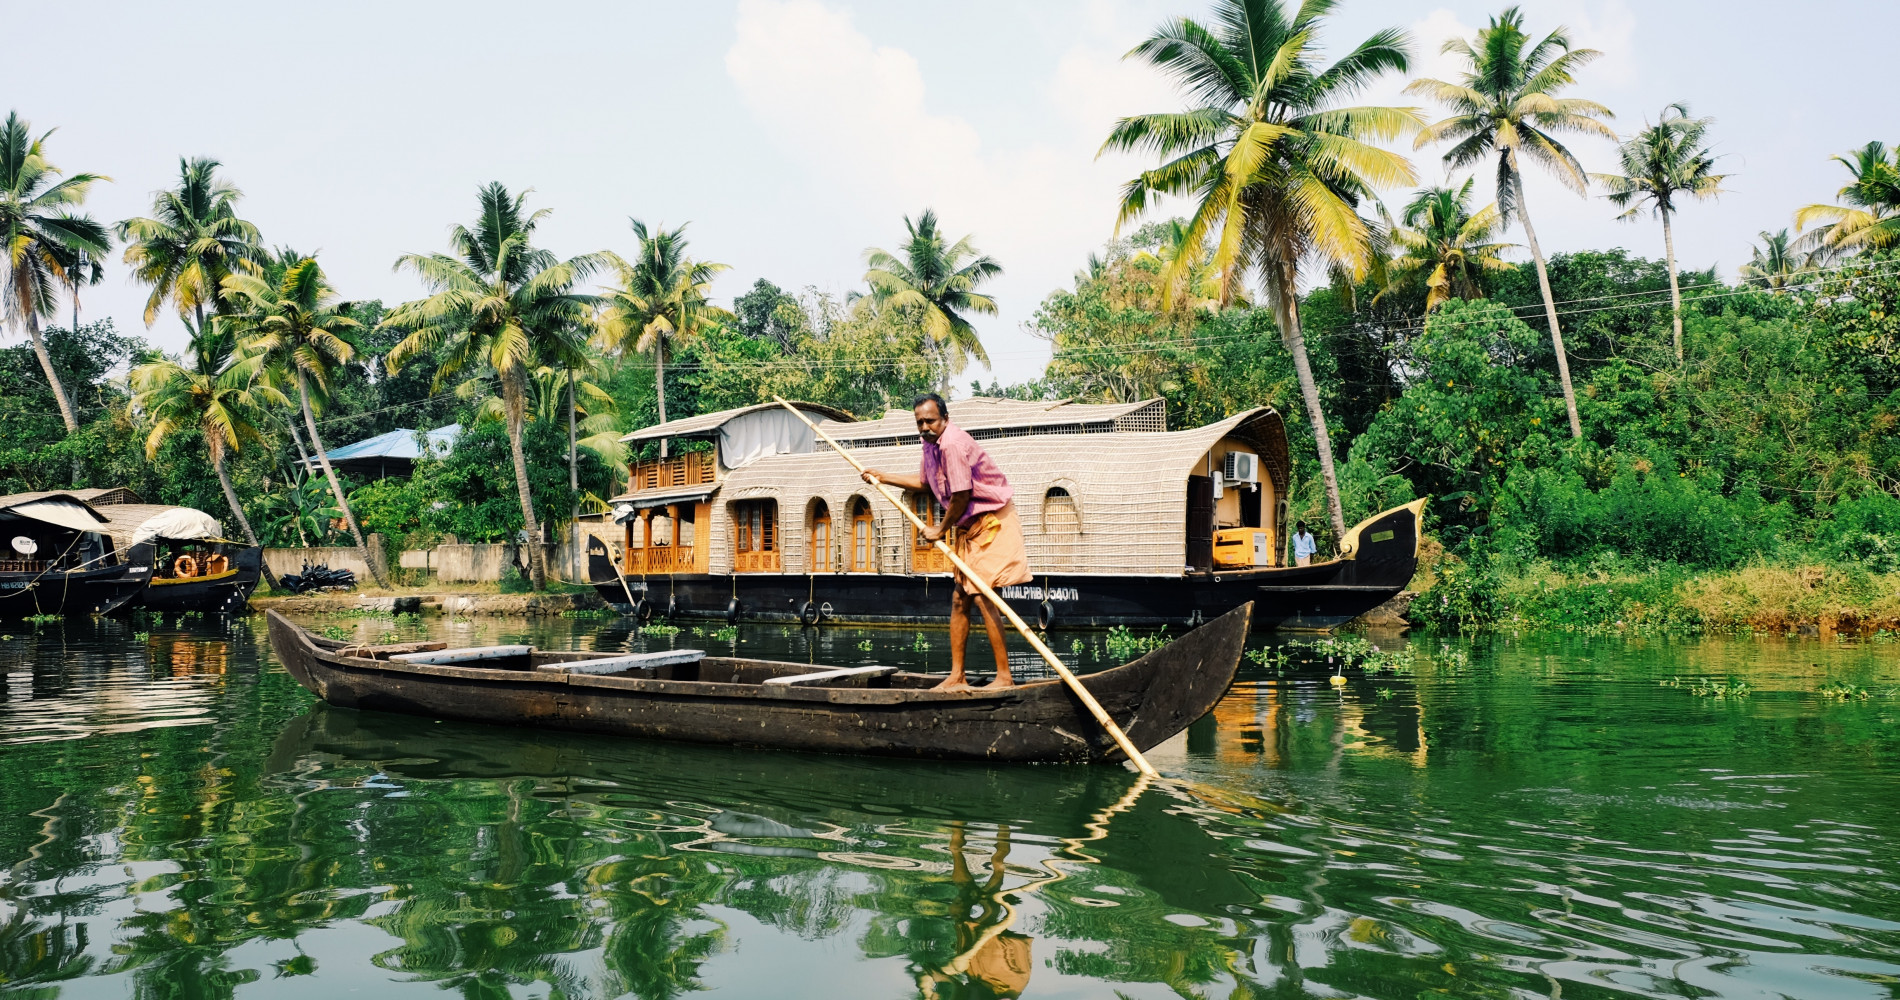 Cruise aboard a majestic Indian houseboat